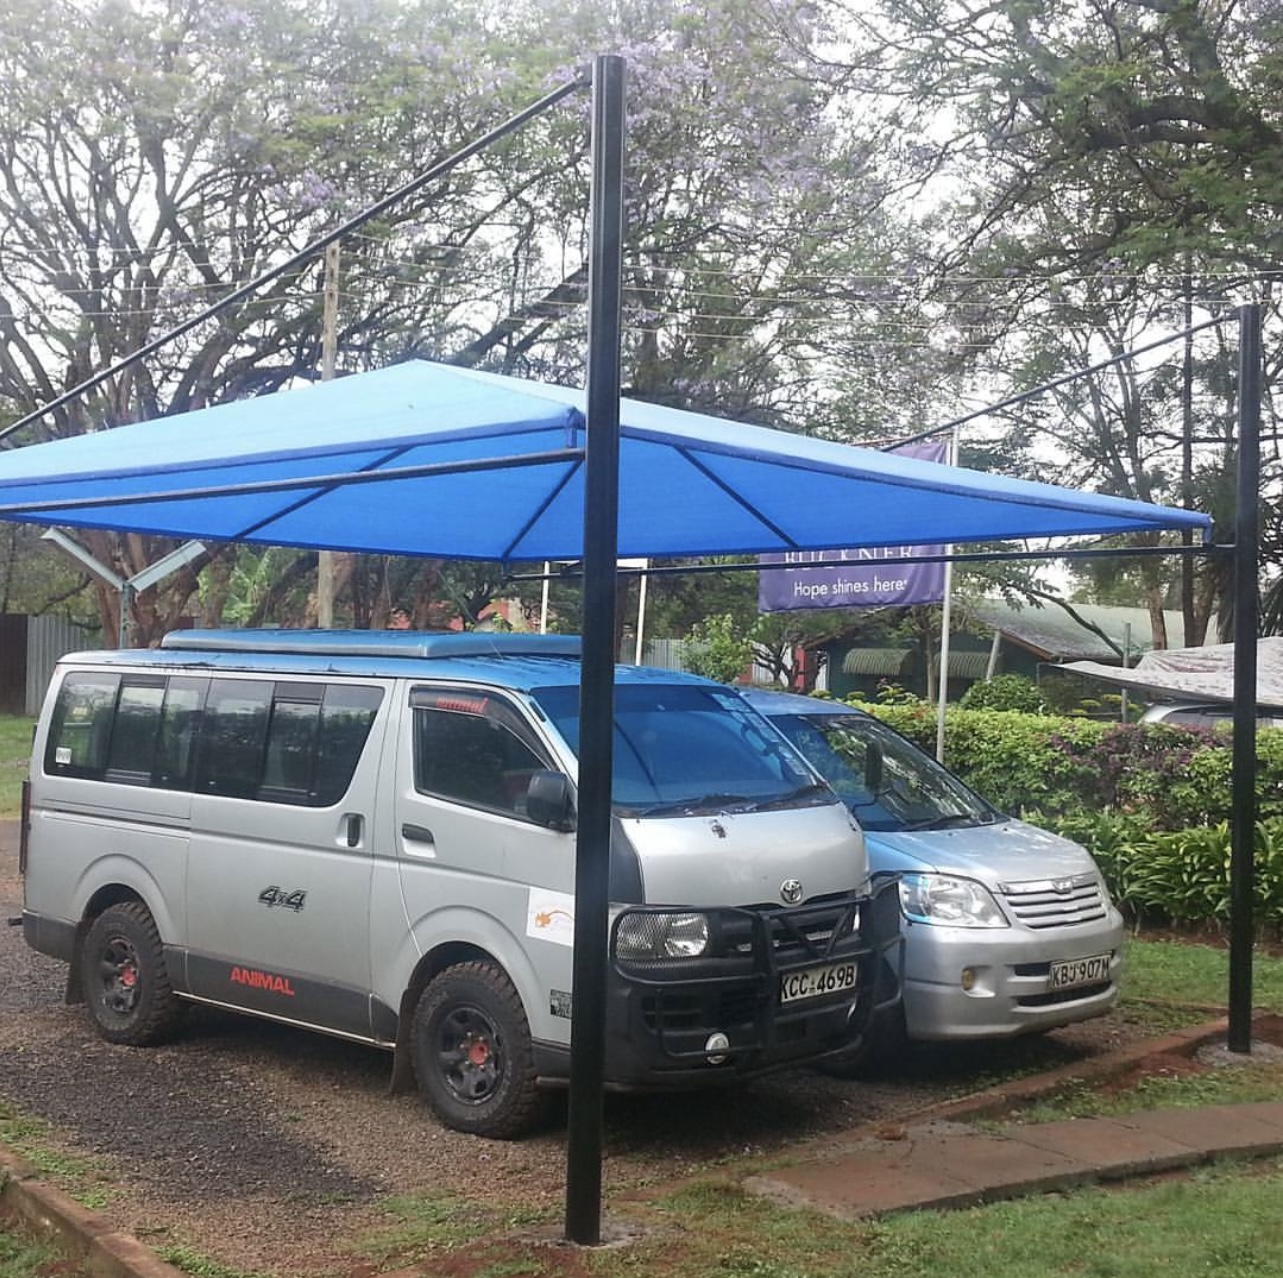 Unique and Modern Carports-Parking Shades-Vehicle Shade Canopies-Cantilever and Curved Shed designs-Waterproof Shade Net Car Covers-Commercial and Residential Car Shade Installers In Meru, Nanyuki, Nyeri, Murang’a, Karatina, Embu